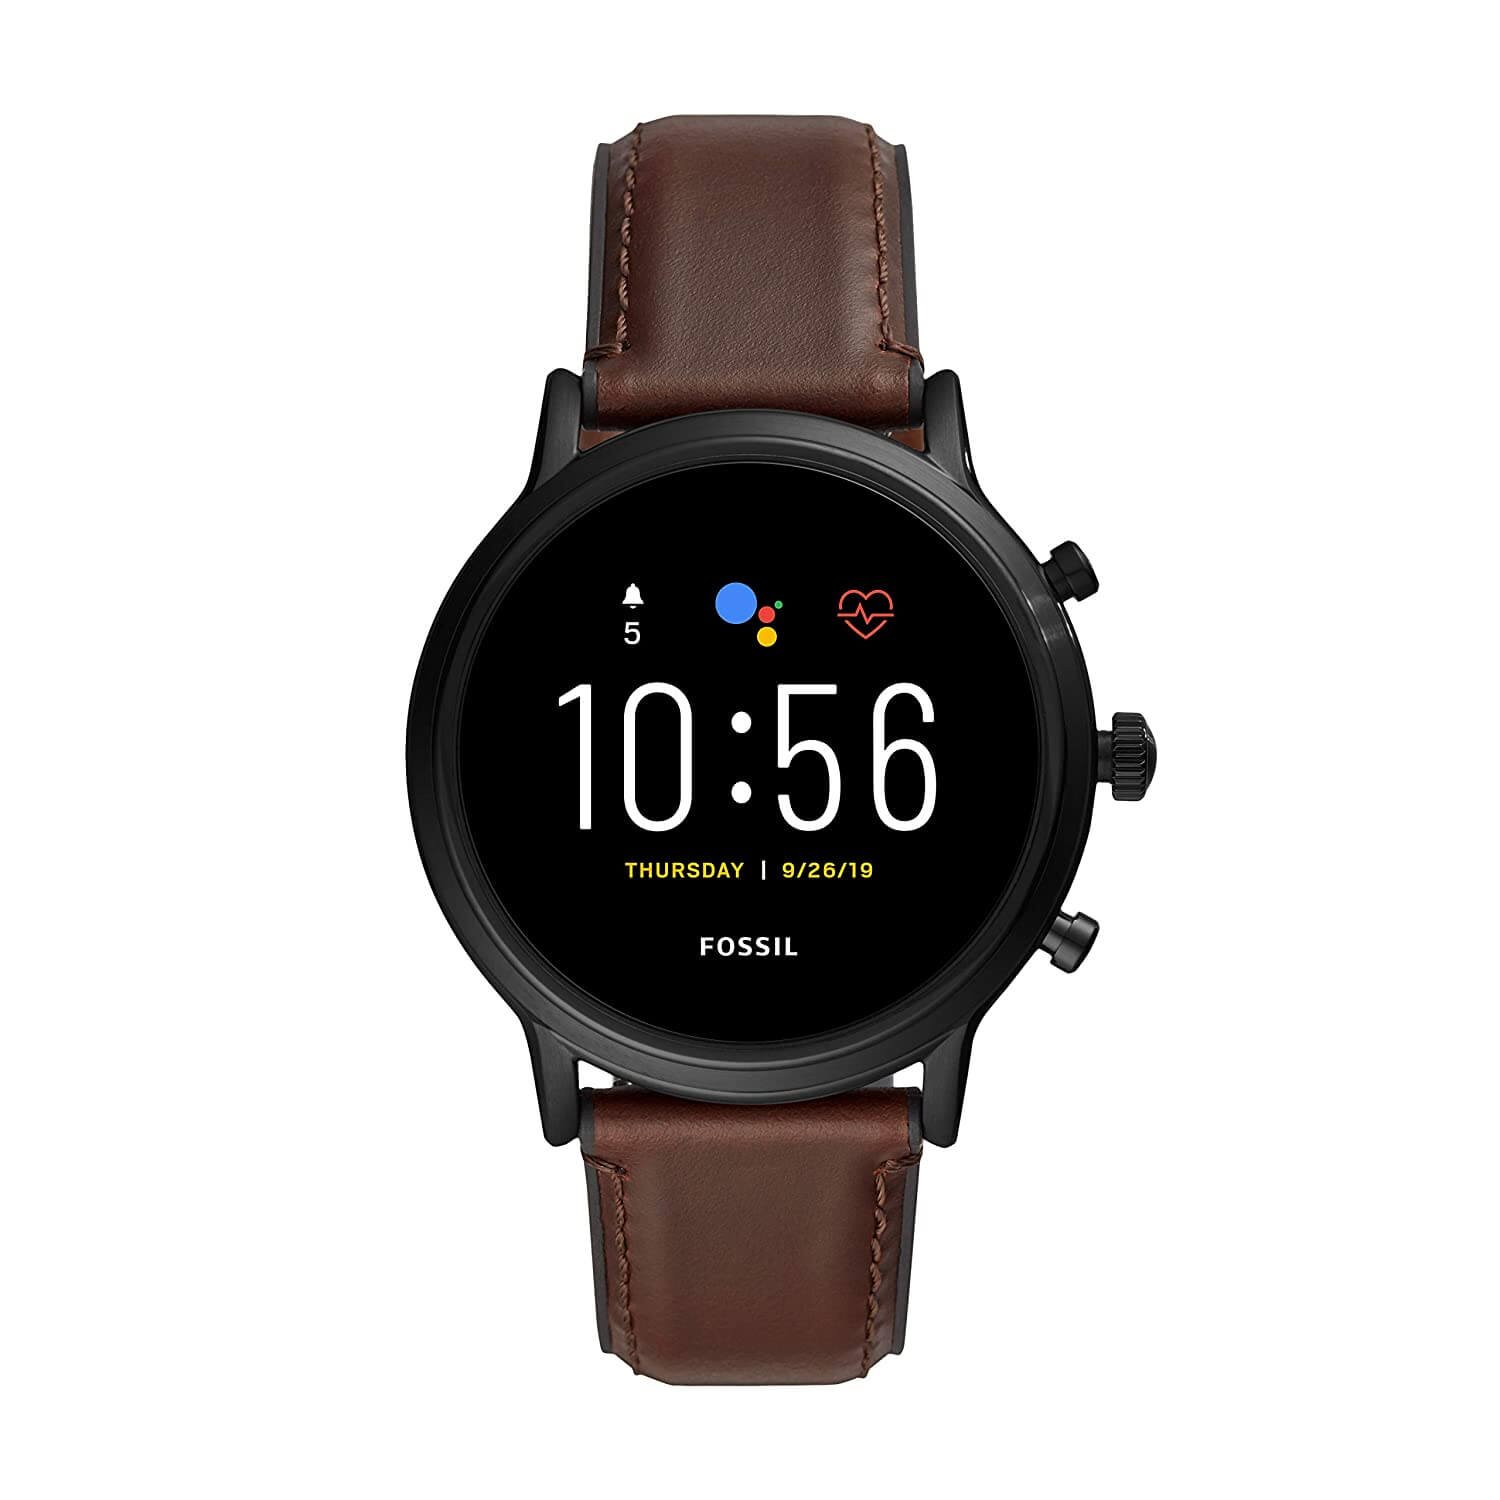 Fossil Gen 5 Carlyle Touchscreen Men's Smartwatch with Speaker, Heart Rate, GPS and Smartphone Notifications - FTW4026, Black